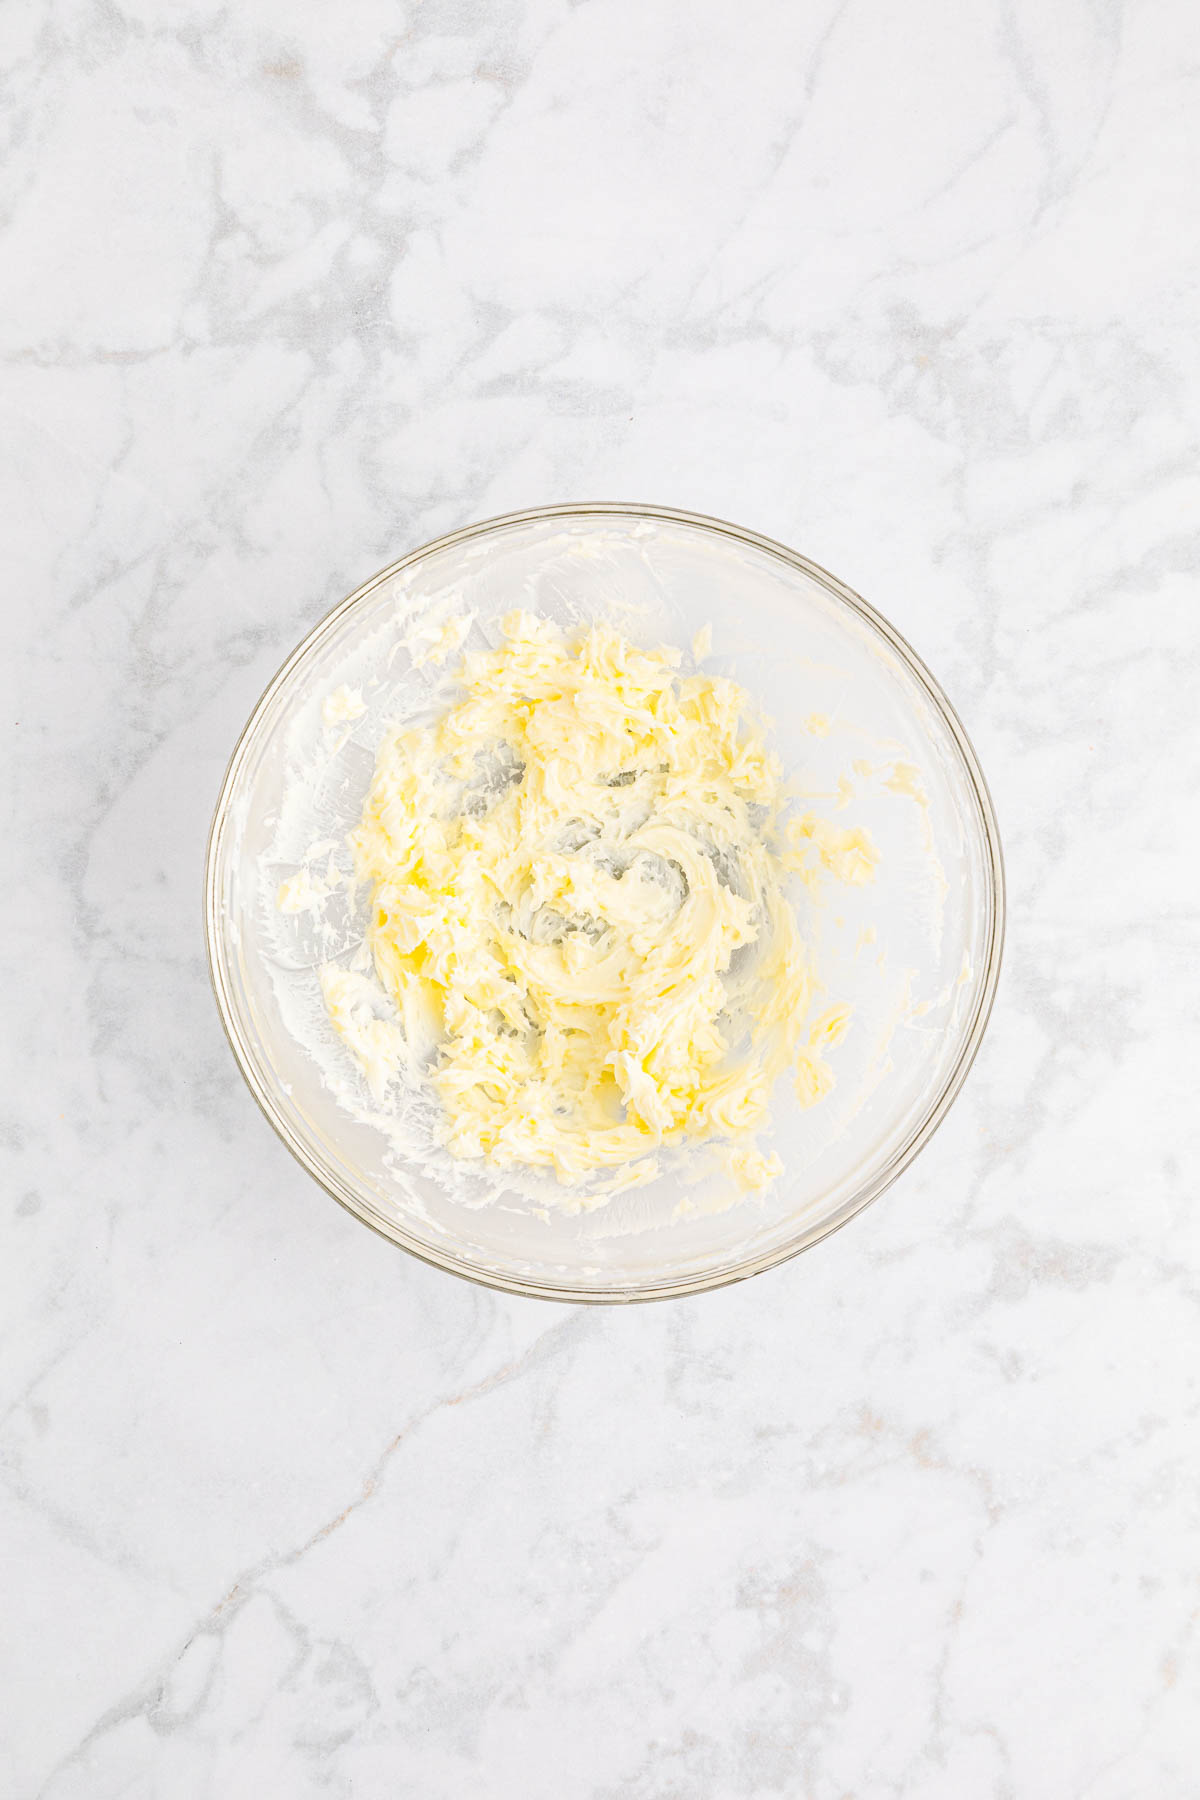 Butter in a glass bowl on a marble surface.